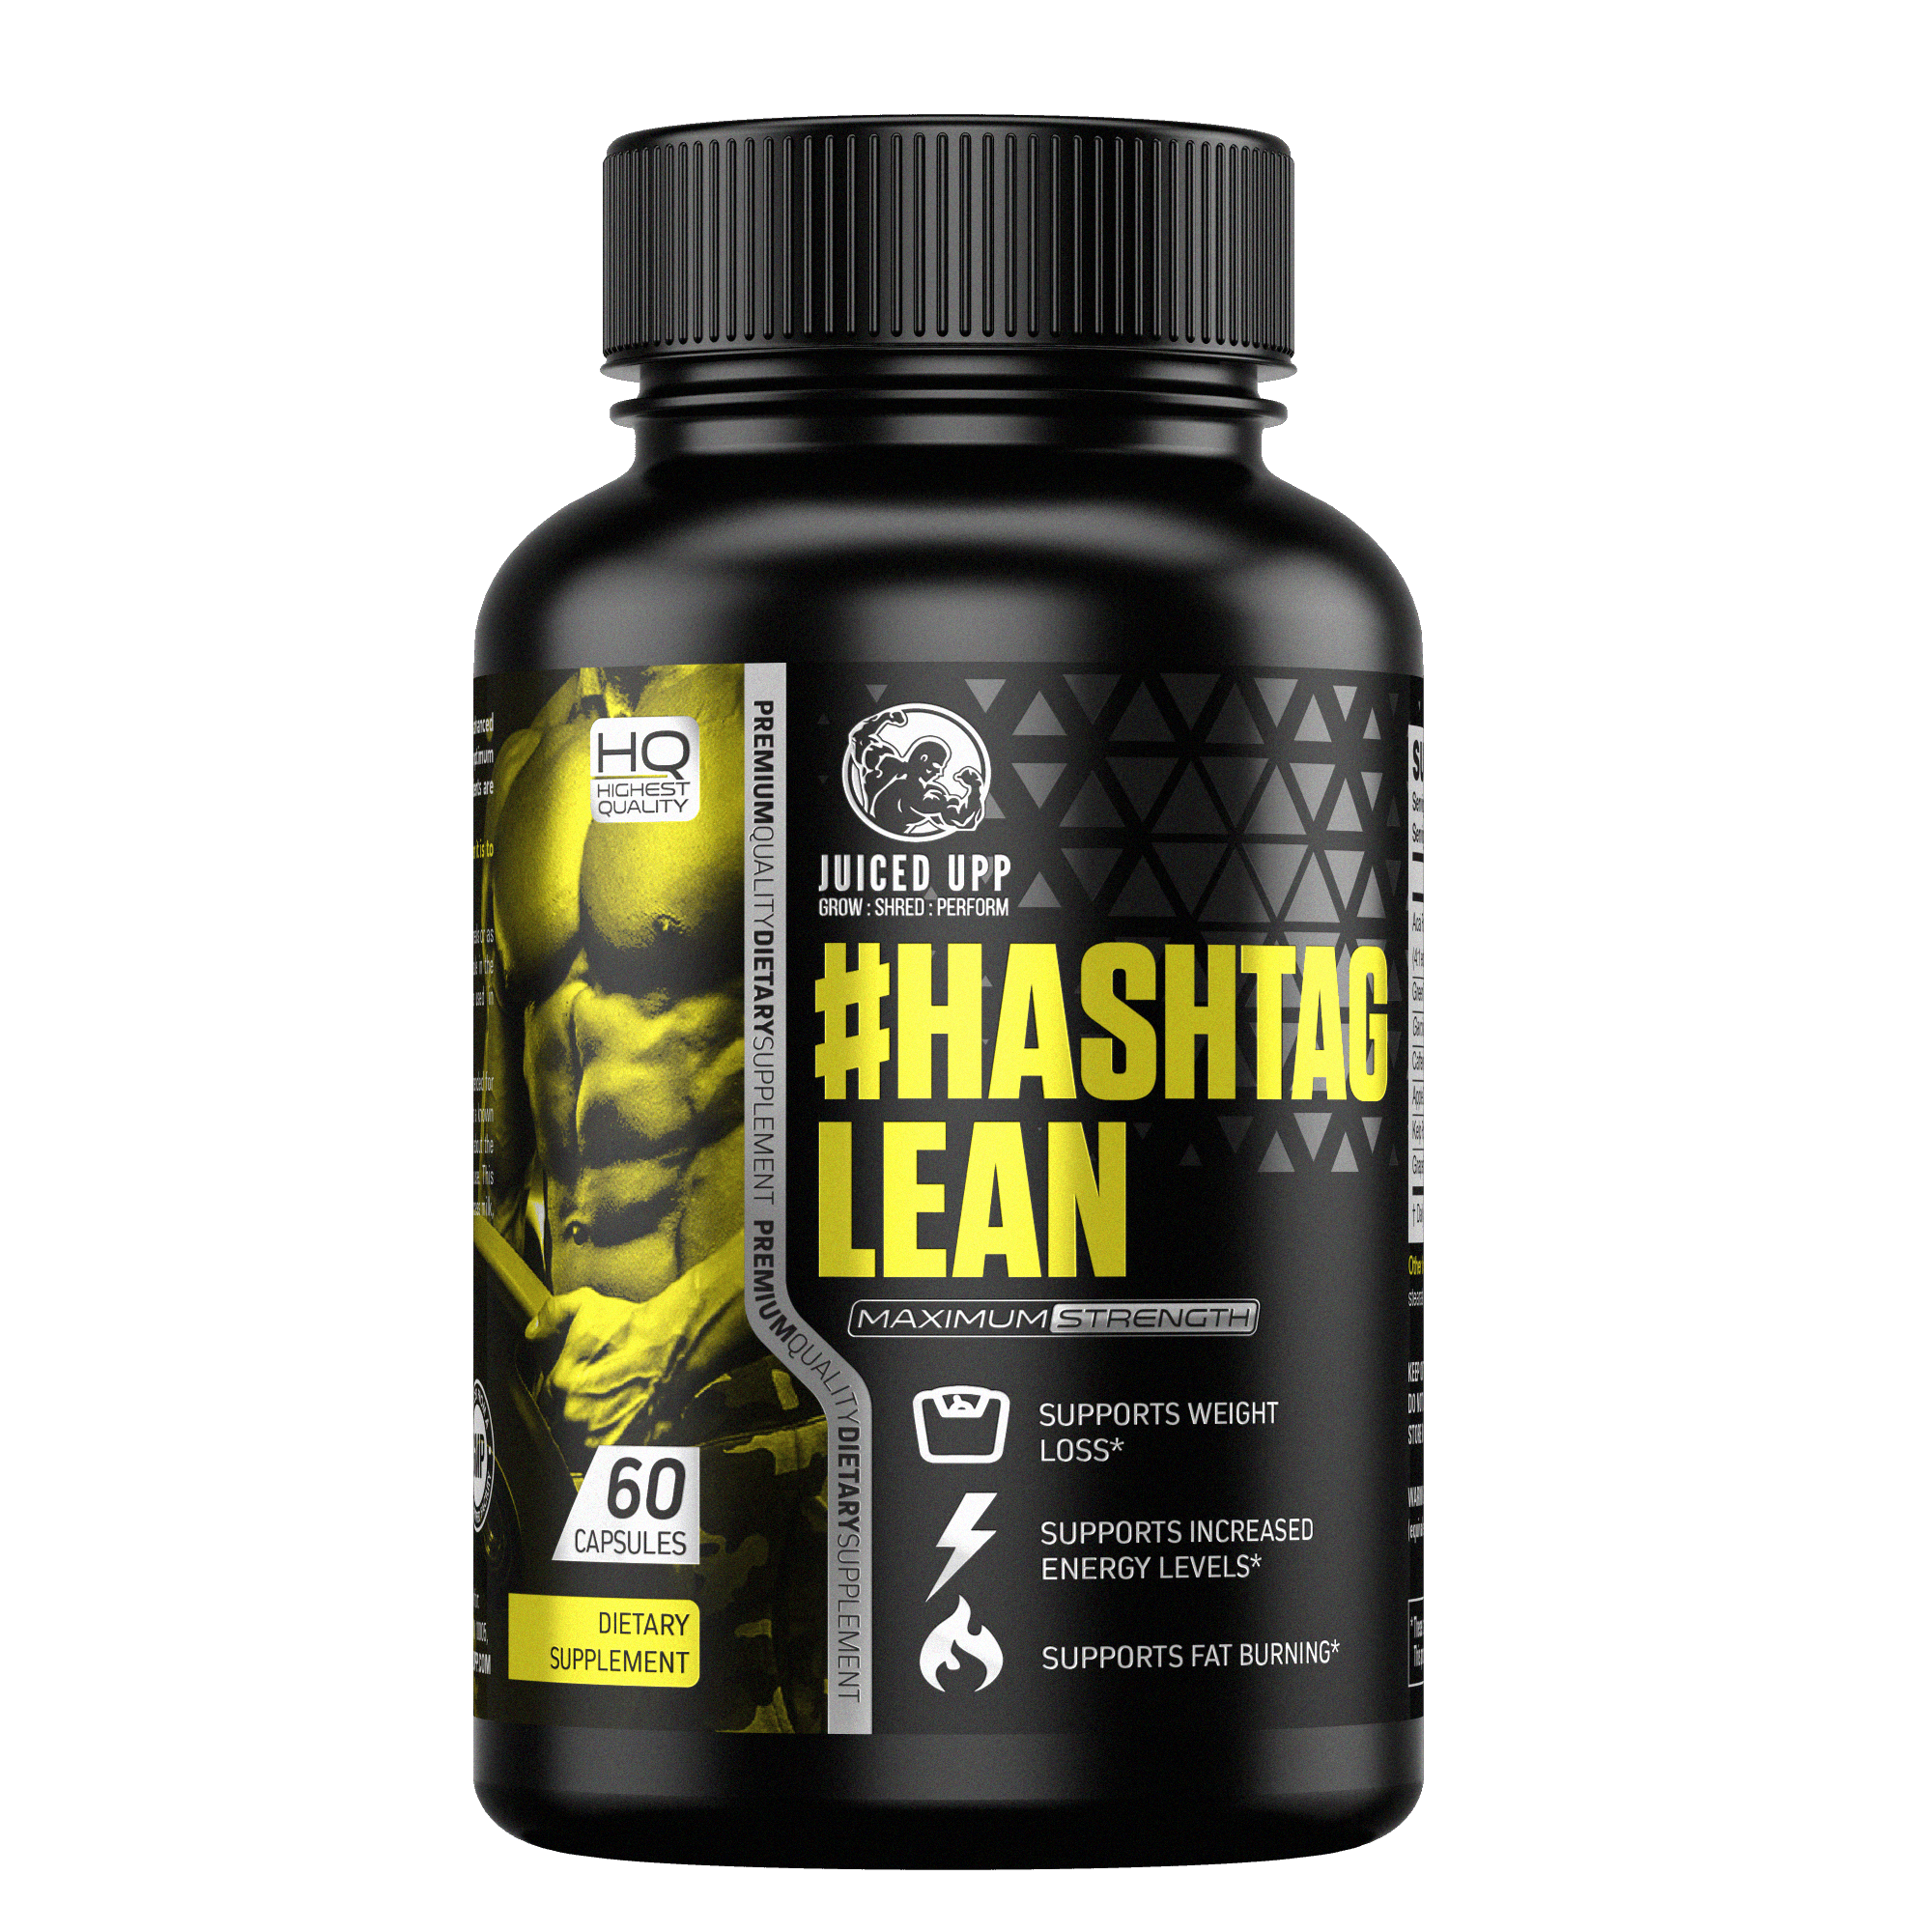 HASHTAG LEAN – WEIGHT LOSS SUPPLEMENT